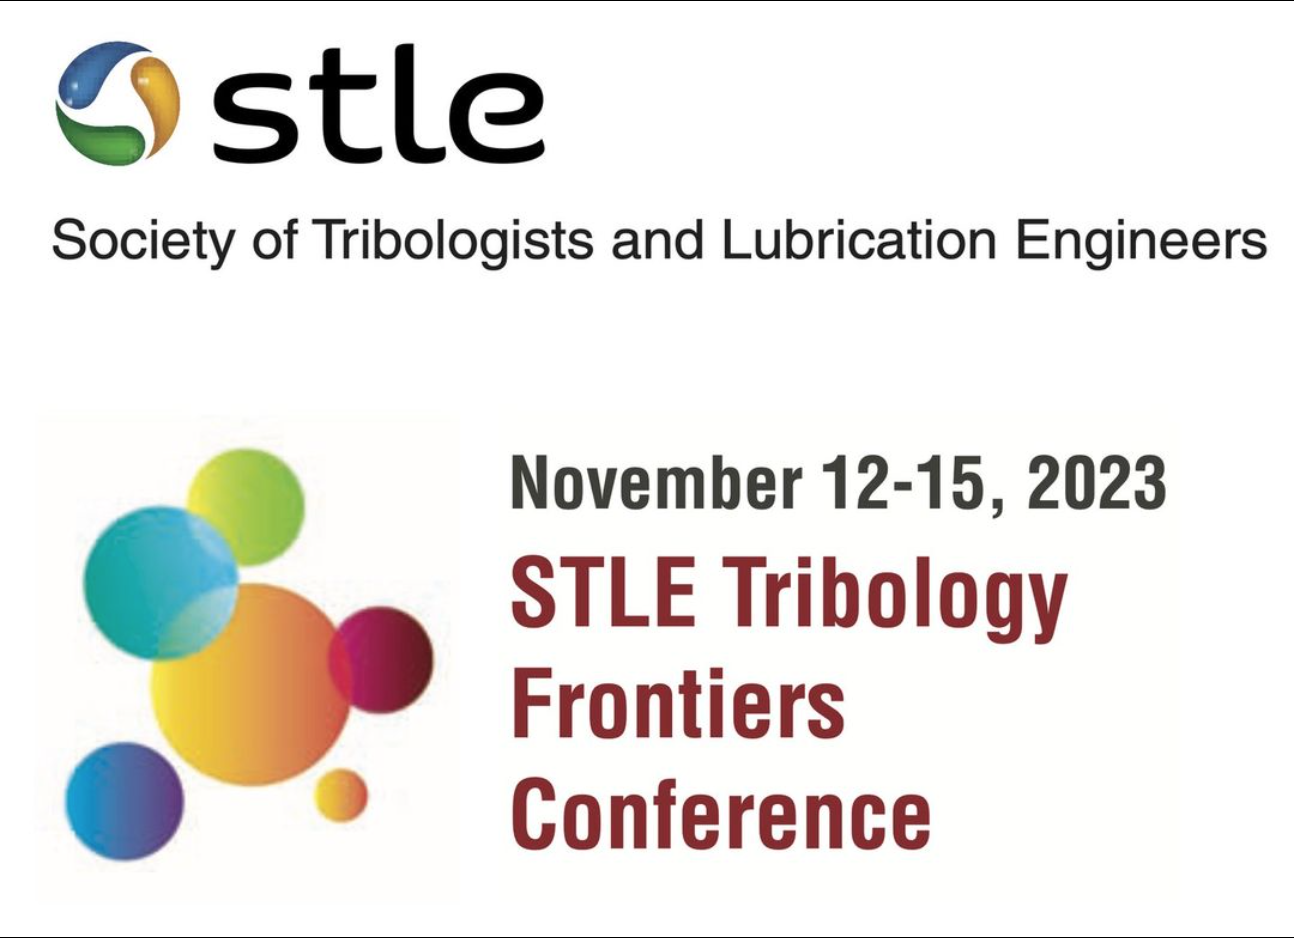 Society of tribologists and Lubrication Engineers Frontiers Conference  November 12-15 2023